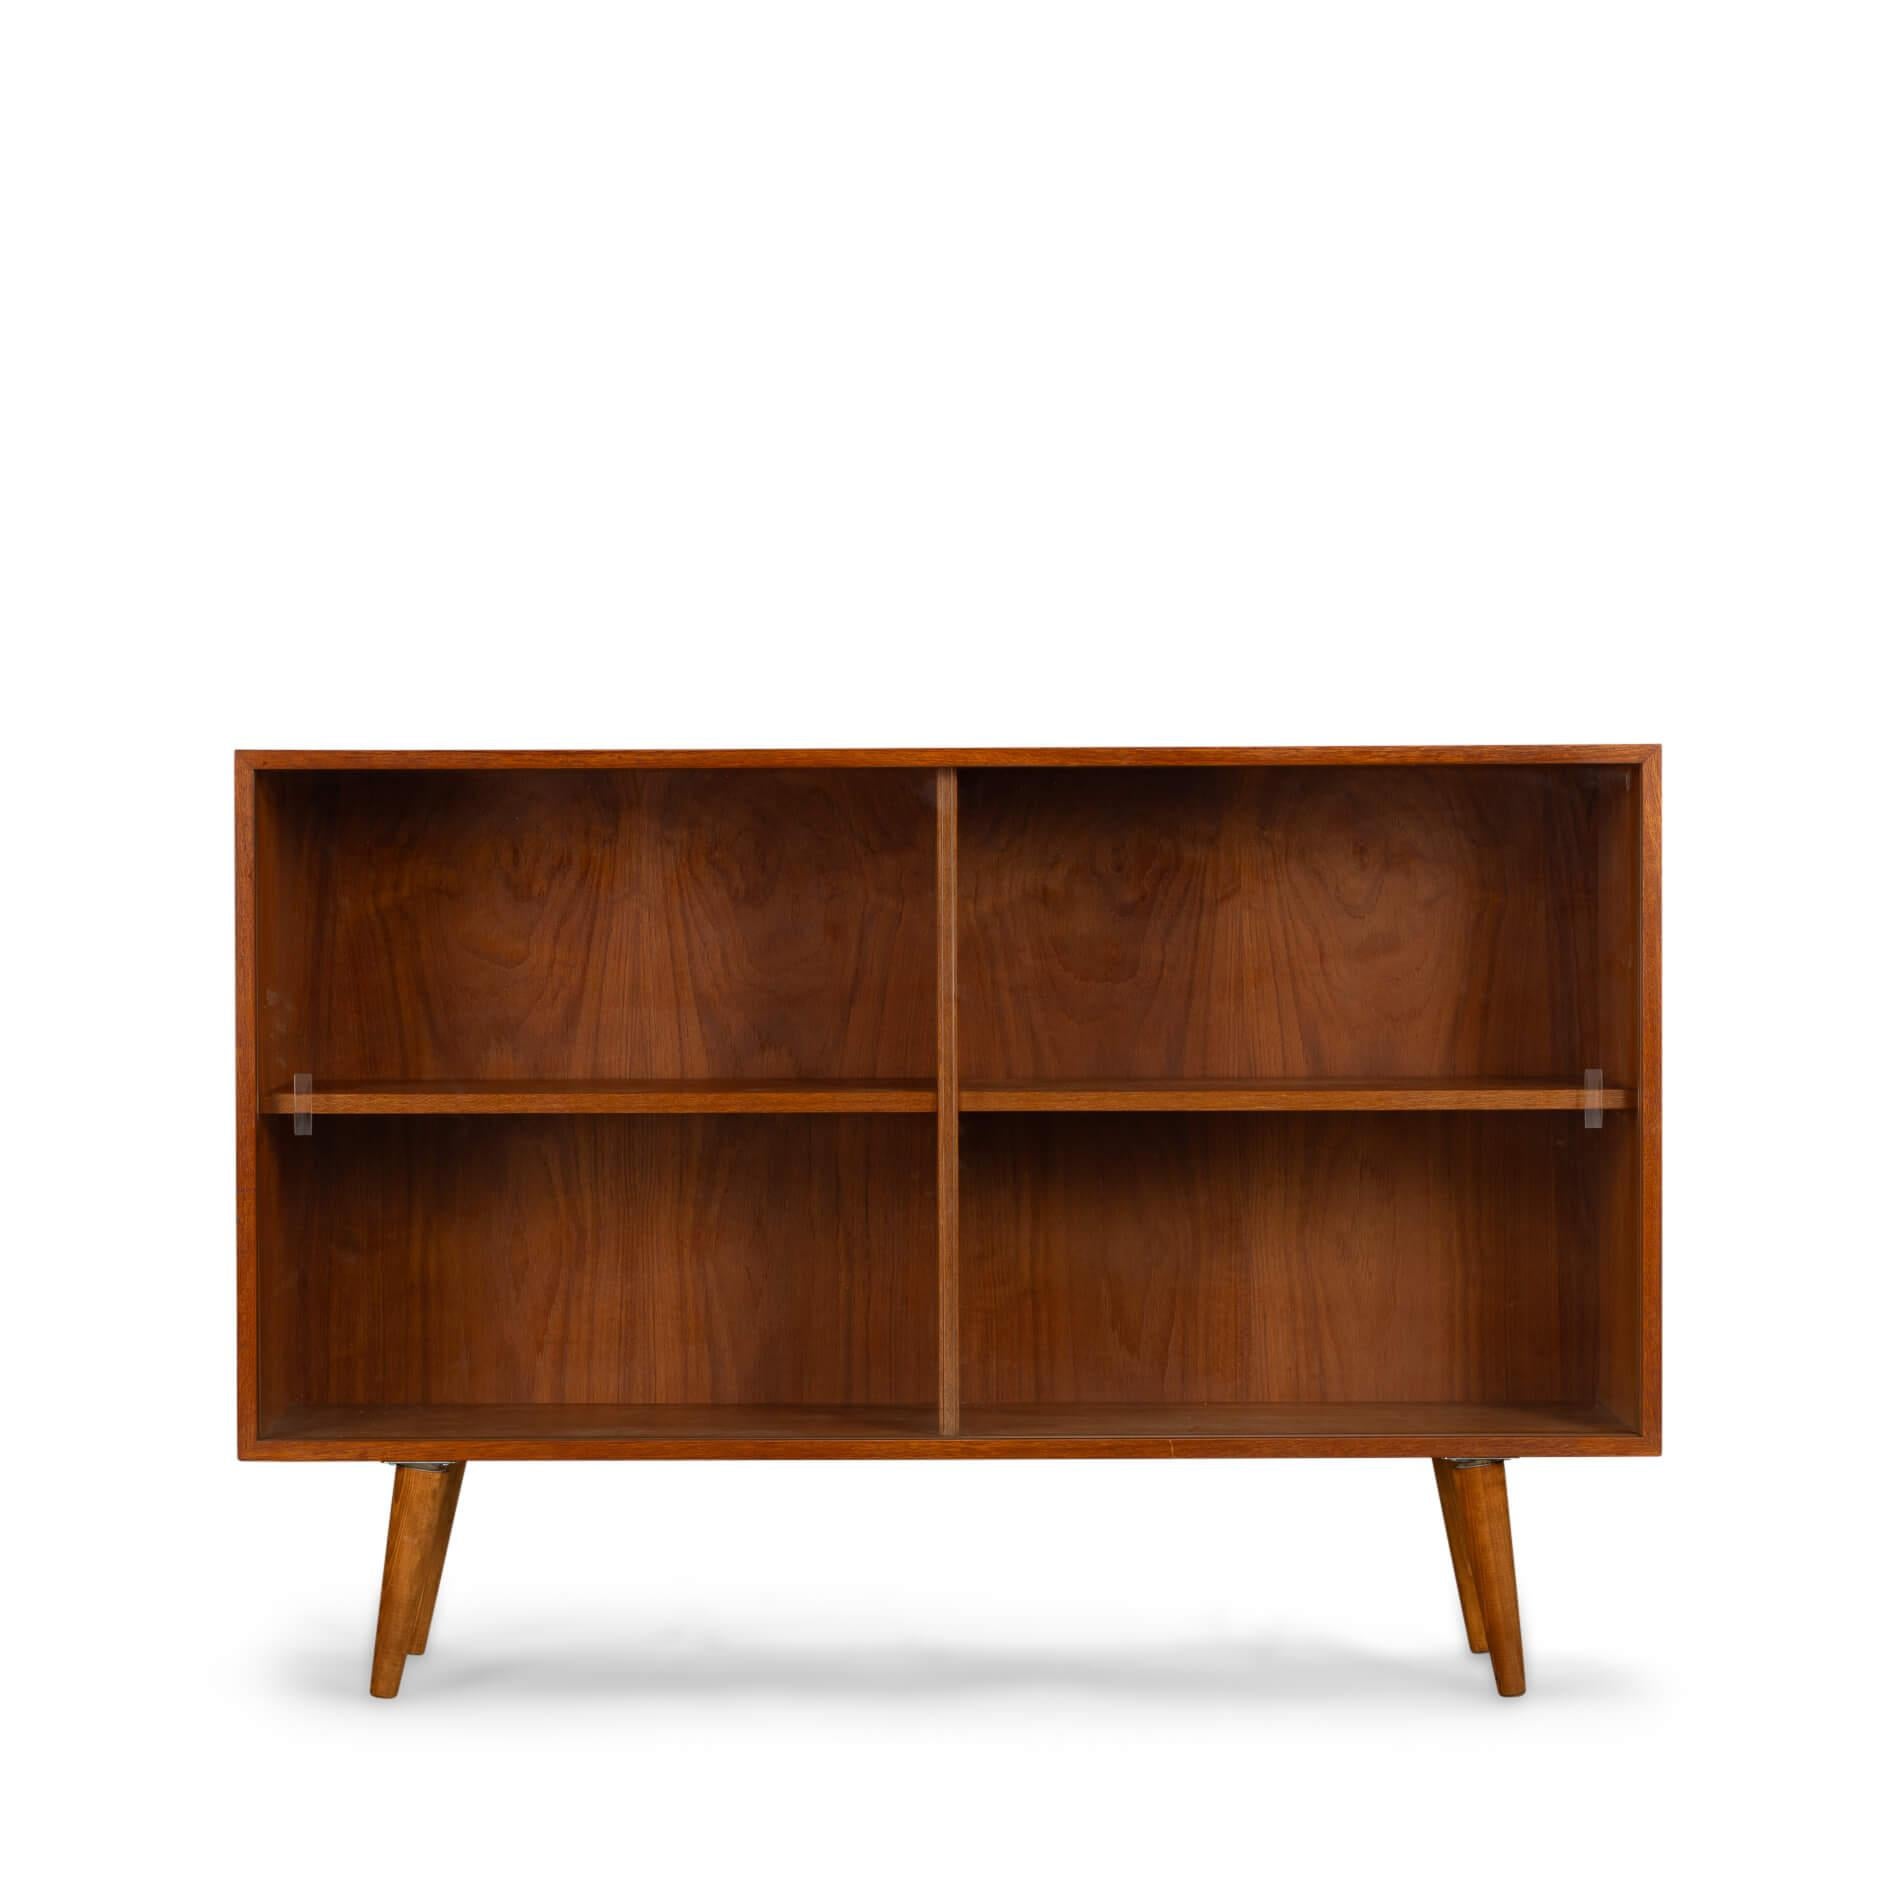 Danish Design: Bookcase
Danish low bookcase in beautiful teak veneer. The vintage chest still has it's original sliding doors.

This chest is in very good vintage condition only a small damage on the right side.